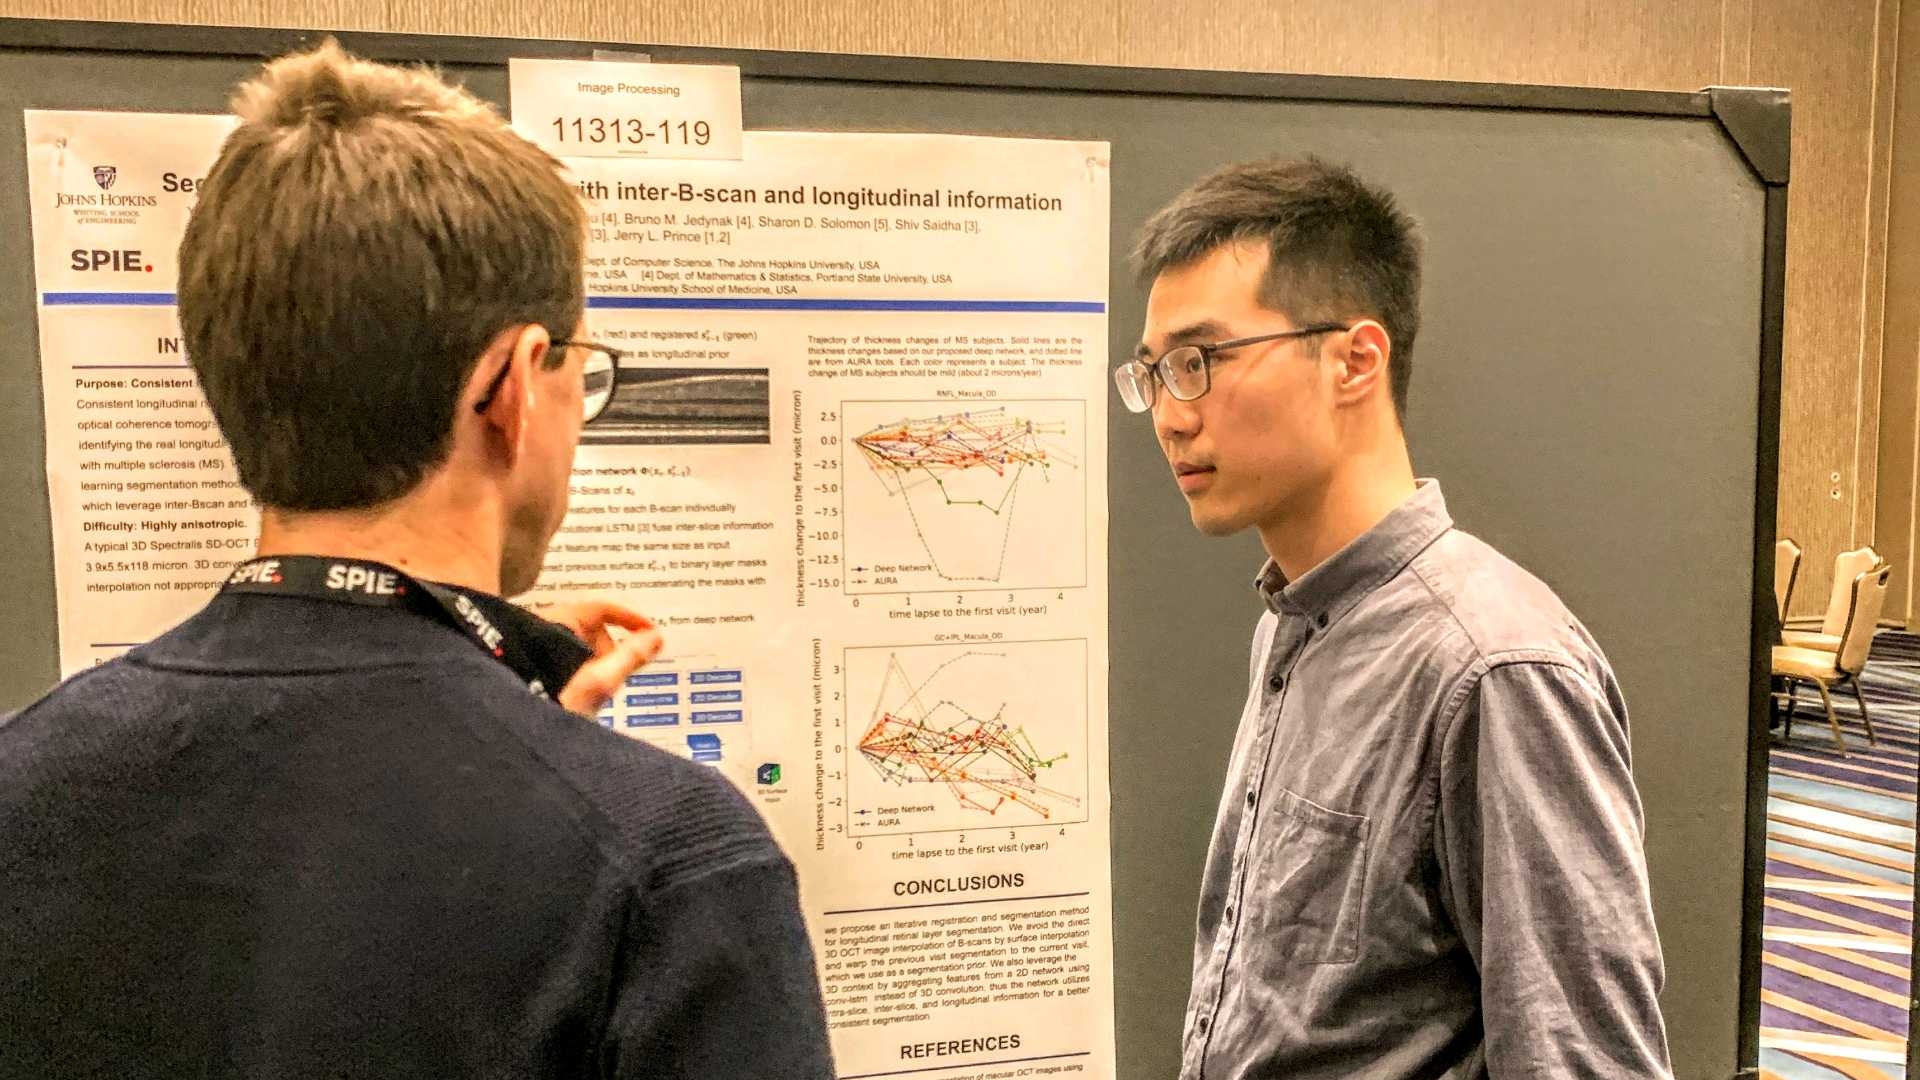 Yihao Liu presenting a poster at SPIE-MI 2020.